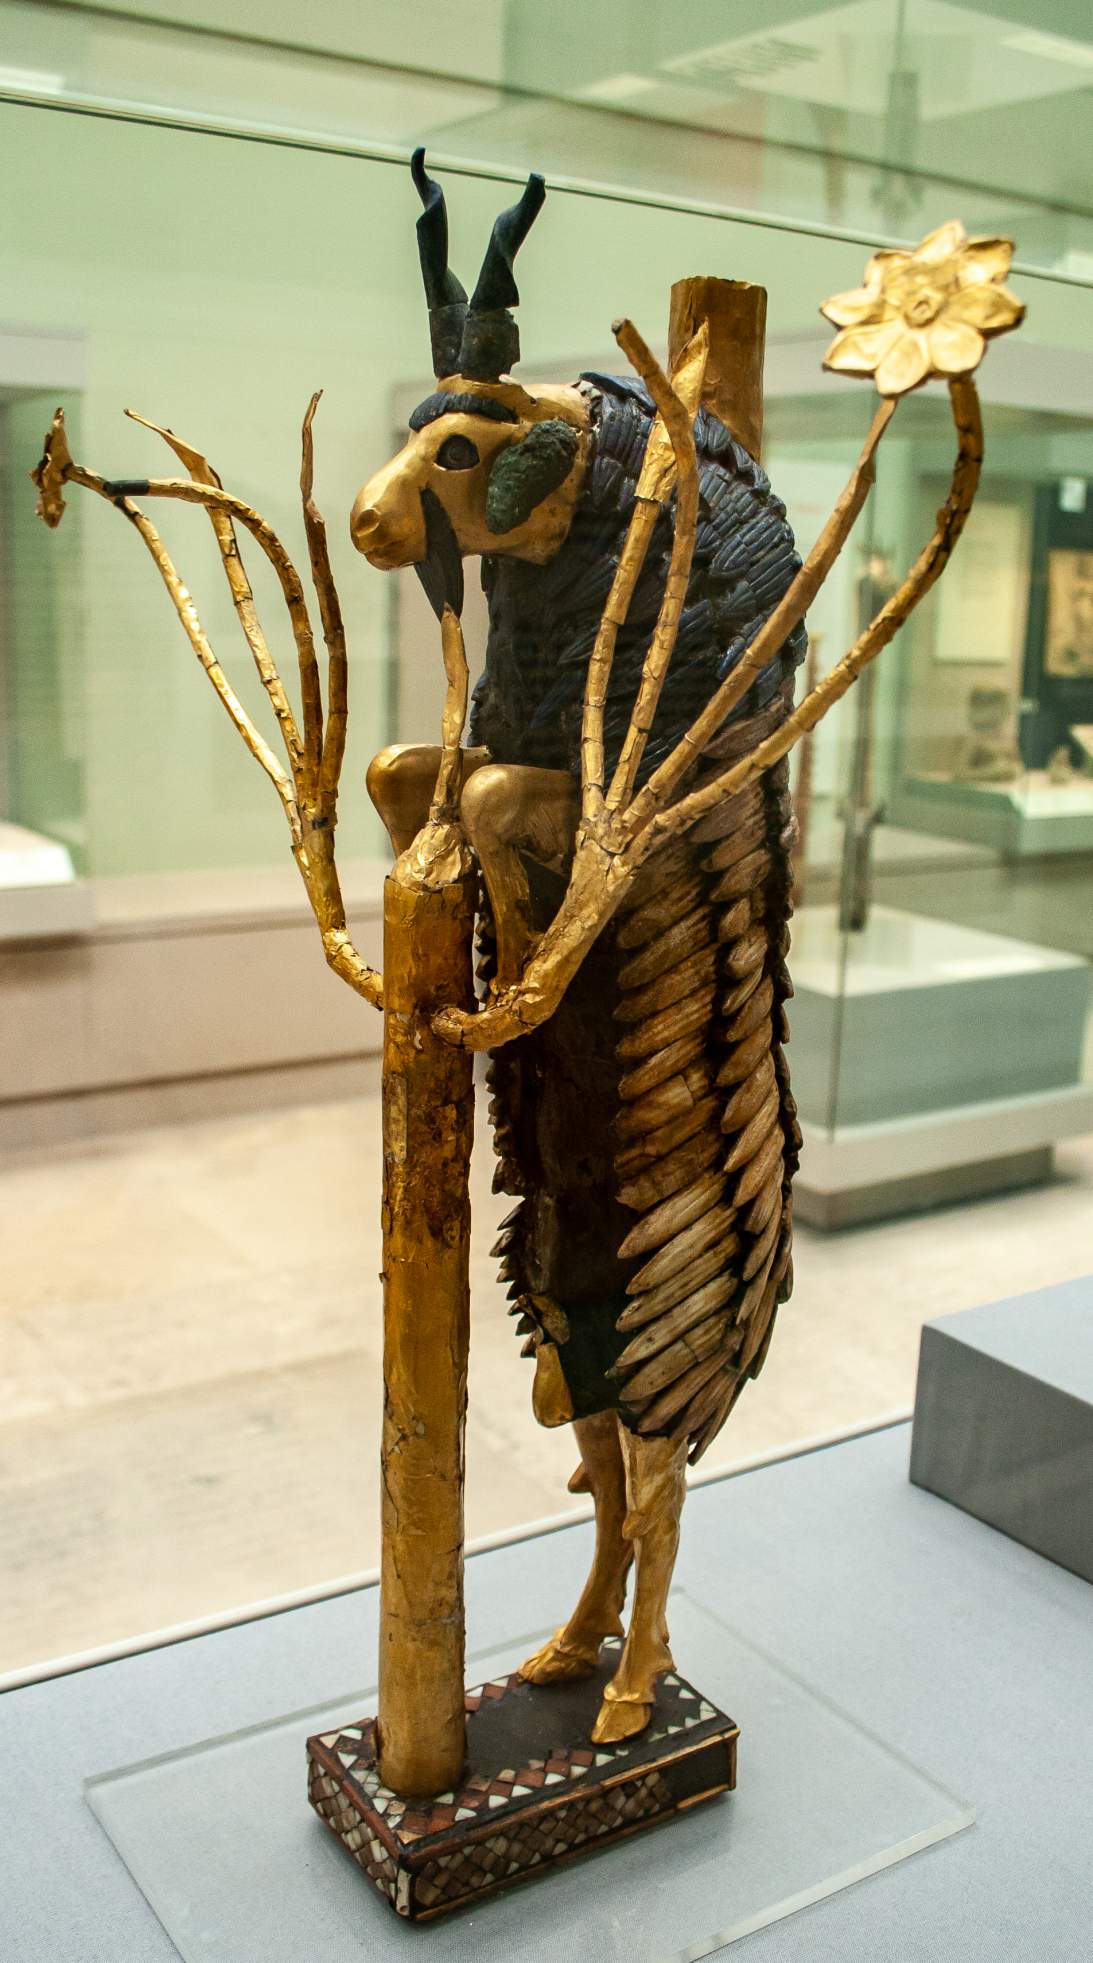 The Ram in a Thicket: The magnificent Mesopotamian Early Dynasty artifact 2